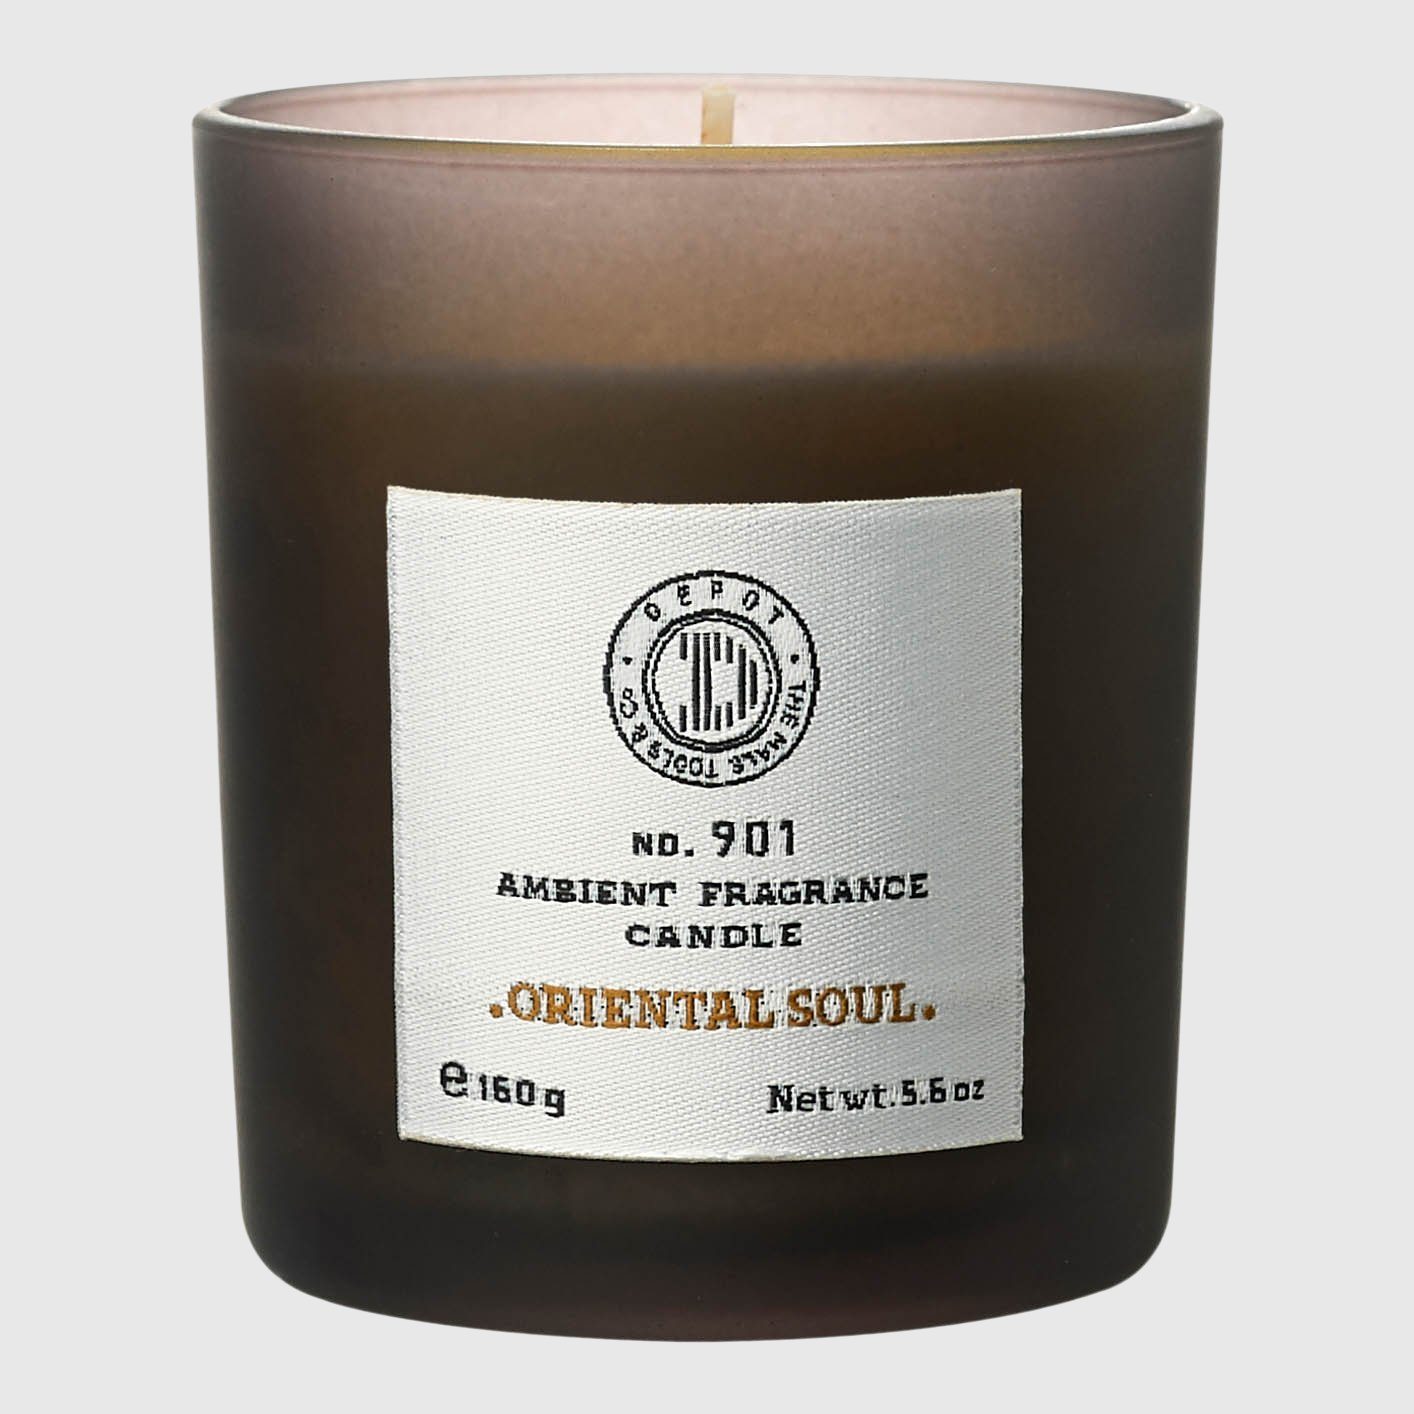 Depot No. 901 Ambient Fragrance Candle Candle Depot Oriental Soul 